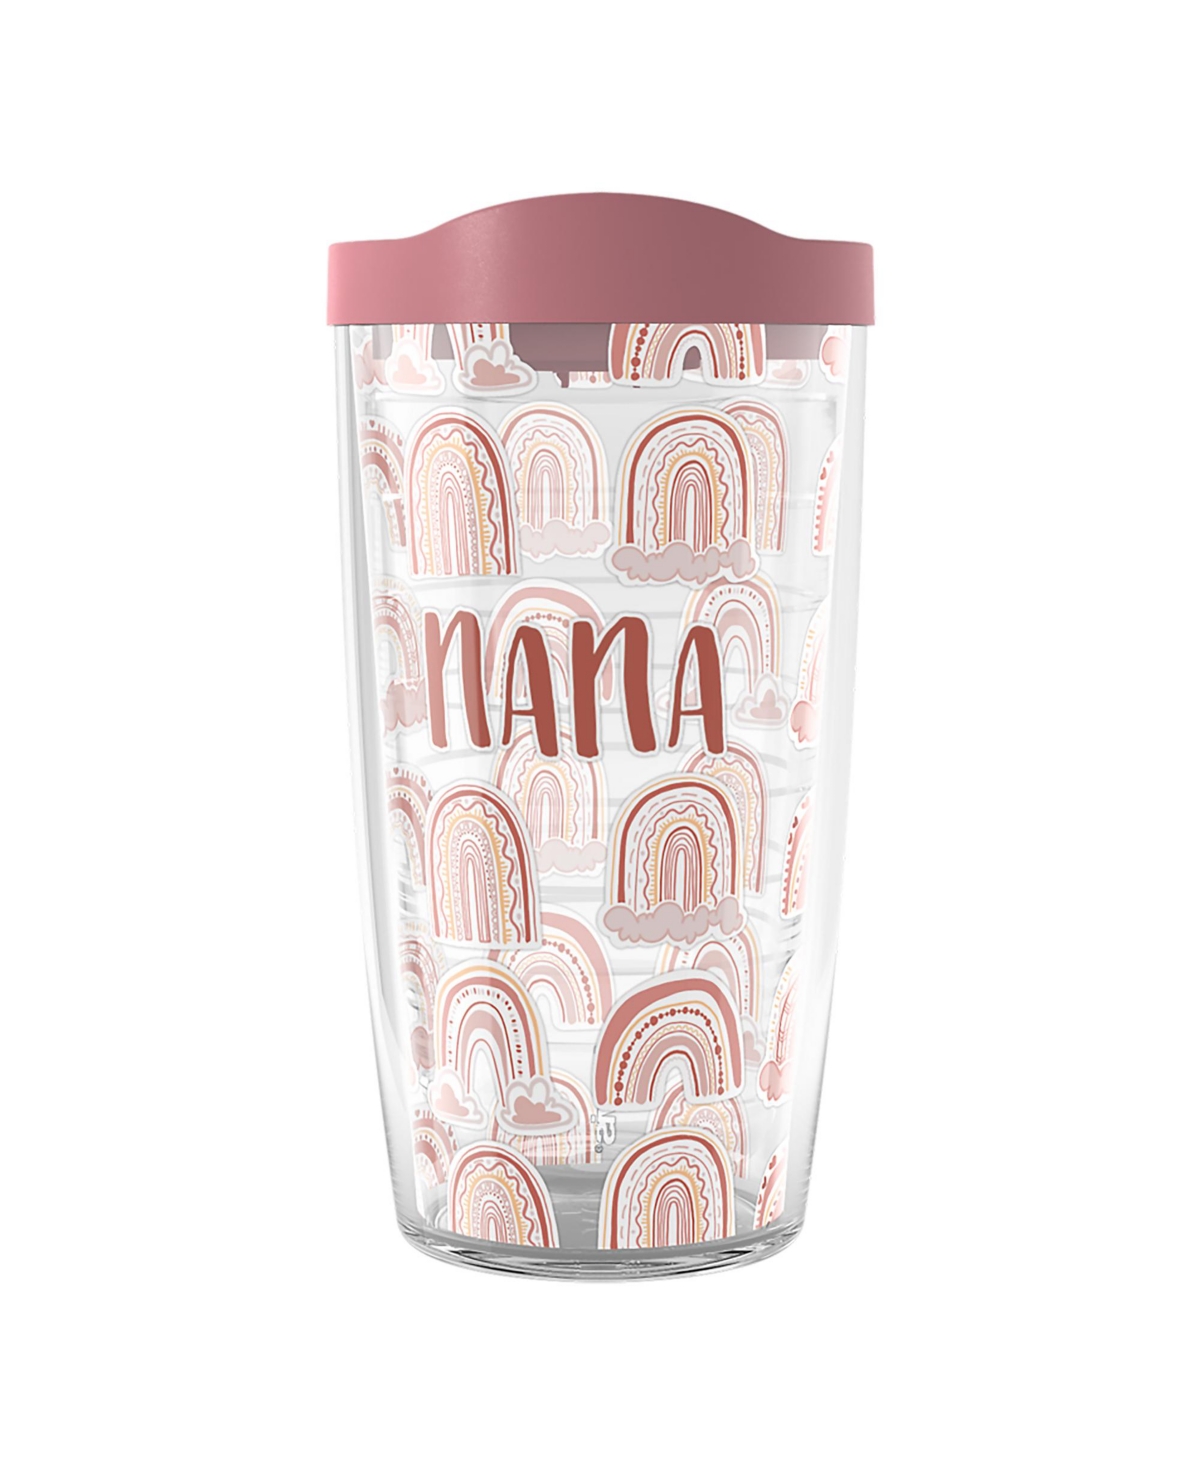 Tervis Tumbler Tervis Boho Rainbow Nana Made In Usa Double Walled Insulated Tumbler Travel Cup Keeps Drinks Cold & In Open Miscellaneous